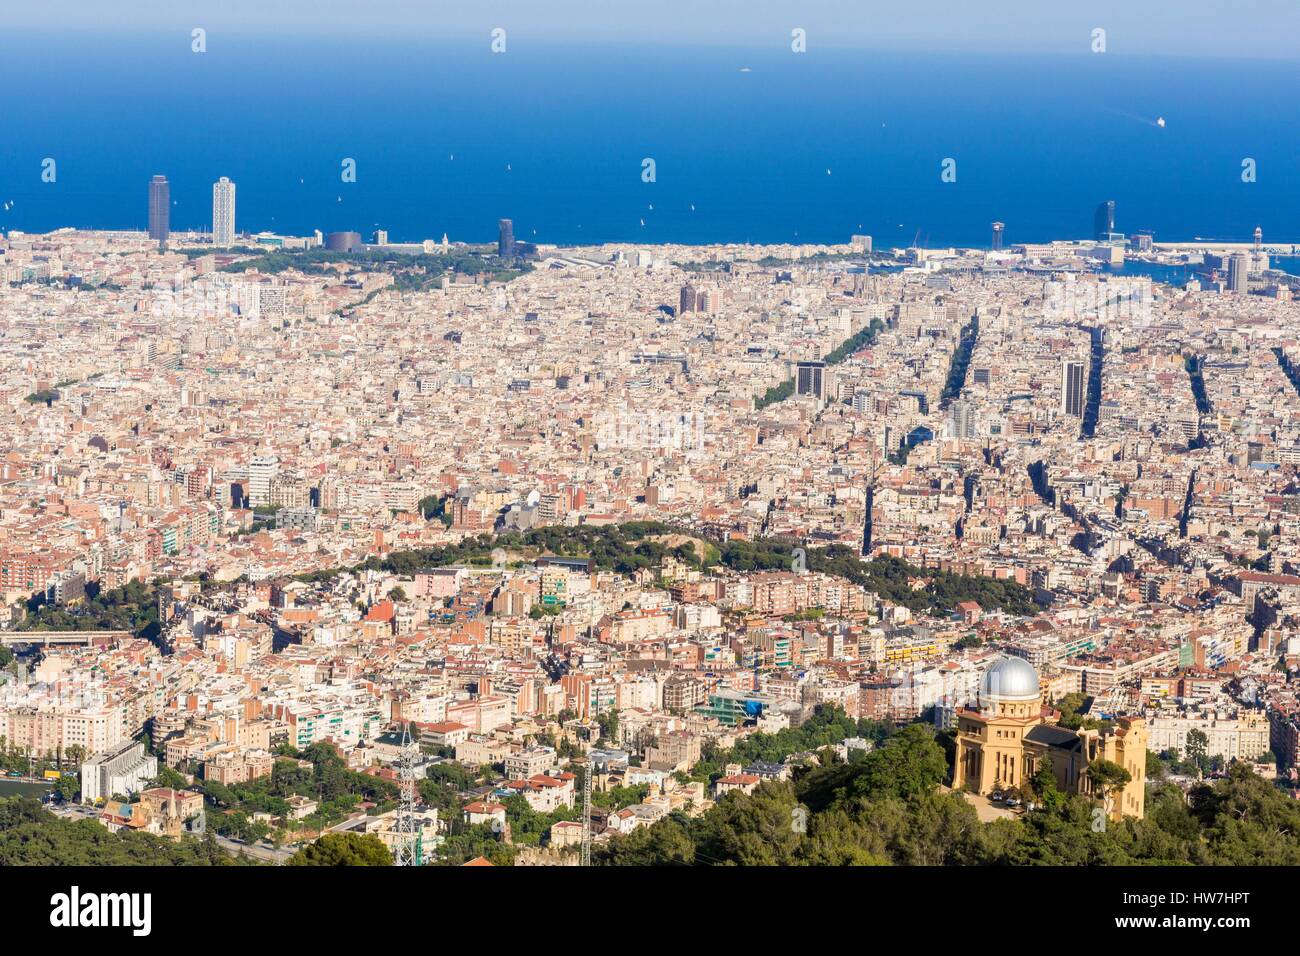 Spain, Catalonia, Barcelona, view from Tibidabo (Serra de Collserola) on the Fabra Observatory (1904) and the Eixample and Barceloneta districts and the old town Stock Photo